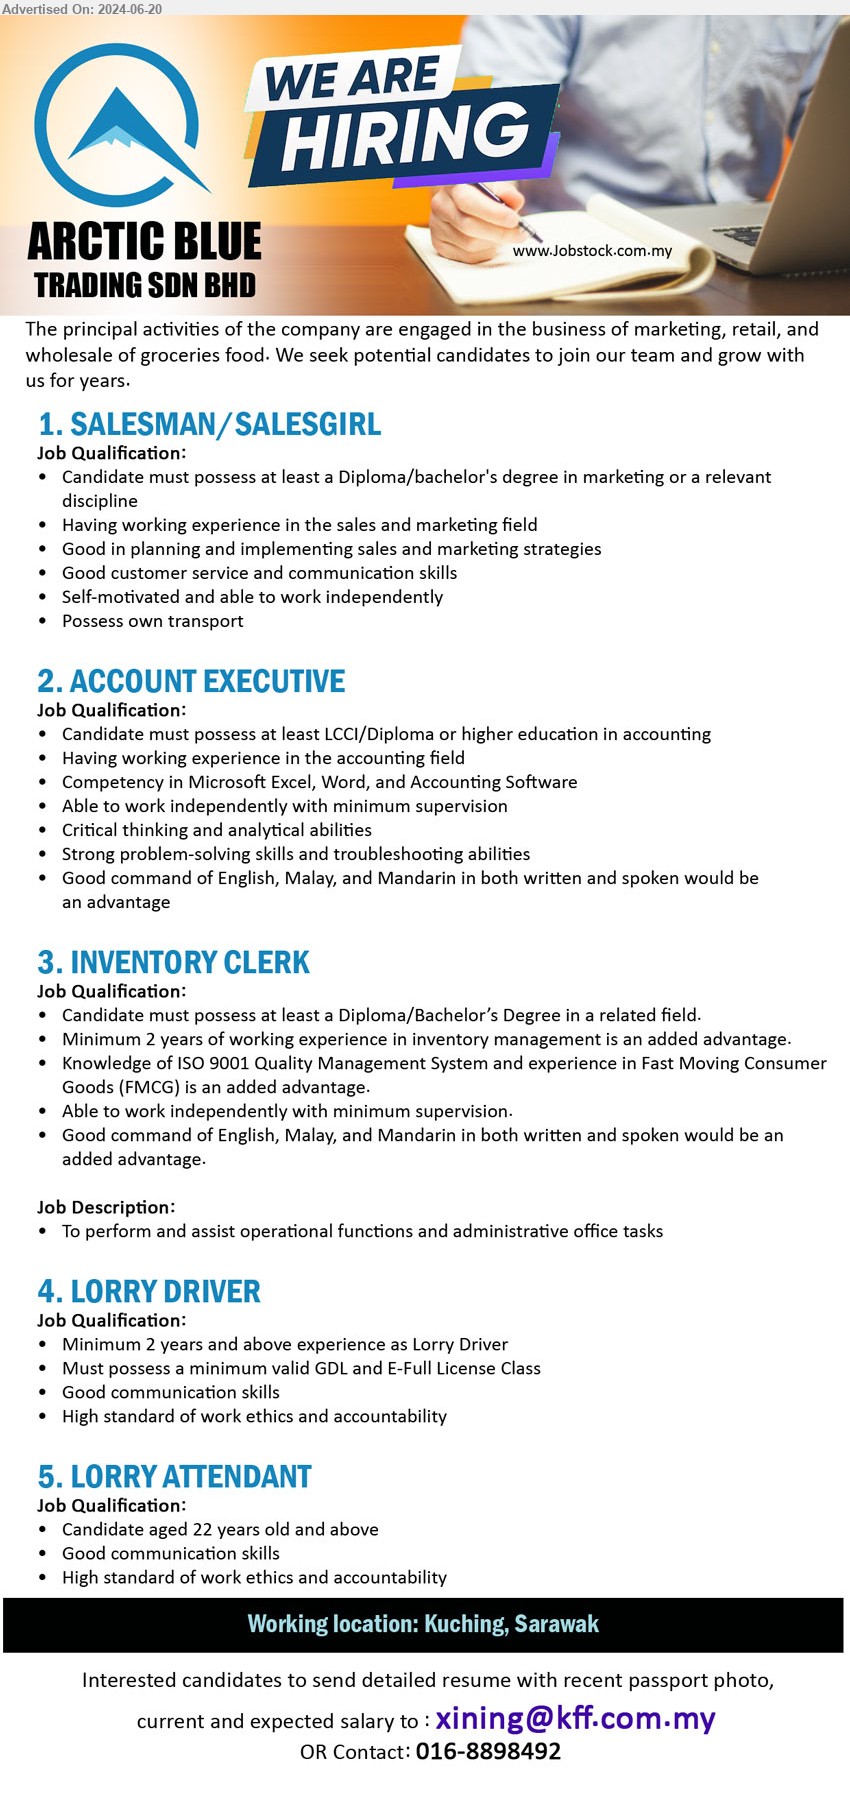 ARCTIC BLUE TRADING SDN BHD - 1. SALESMAN/SALESGIRL (Kuching), Diploma / Bachelor's Degree in Marketing,...
2. ACCOUNT EXECUTIVE (Kuching),  LCCI/Diploma or higher education in Accounting, Having working experience in the accounting field ,...
3. INVENTORY CLERK (Kuching), Diploma/Bachelor’s Degree, Knowledge of ISO 9001 Quality Management System and experience in FMCG,...
4. LORRY DRIVER (Kuching), Must possess a minimum valid GDL and E-Full License Class,...
5. LORRY ATTENDANT (Kuching), High standard of work ethics and accountability,...
Contact: 016-8898492 / Email resume to ...